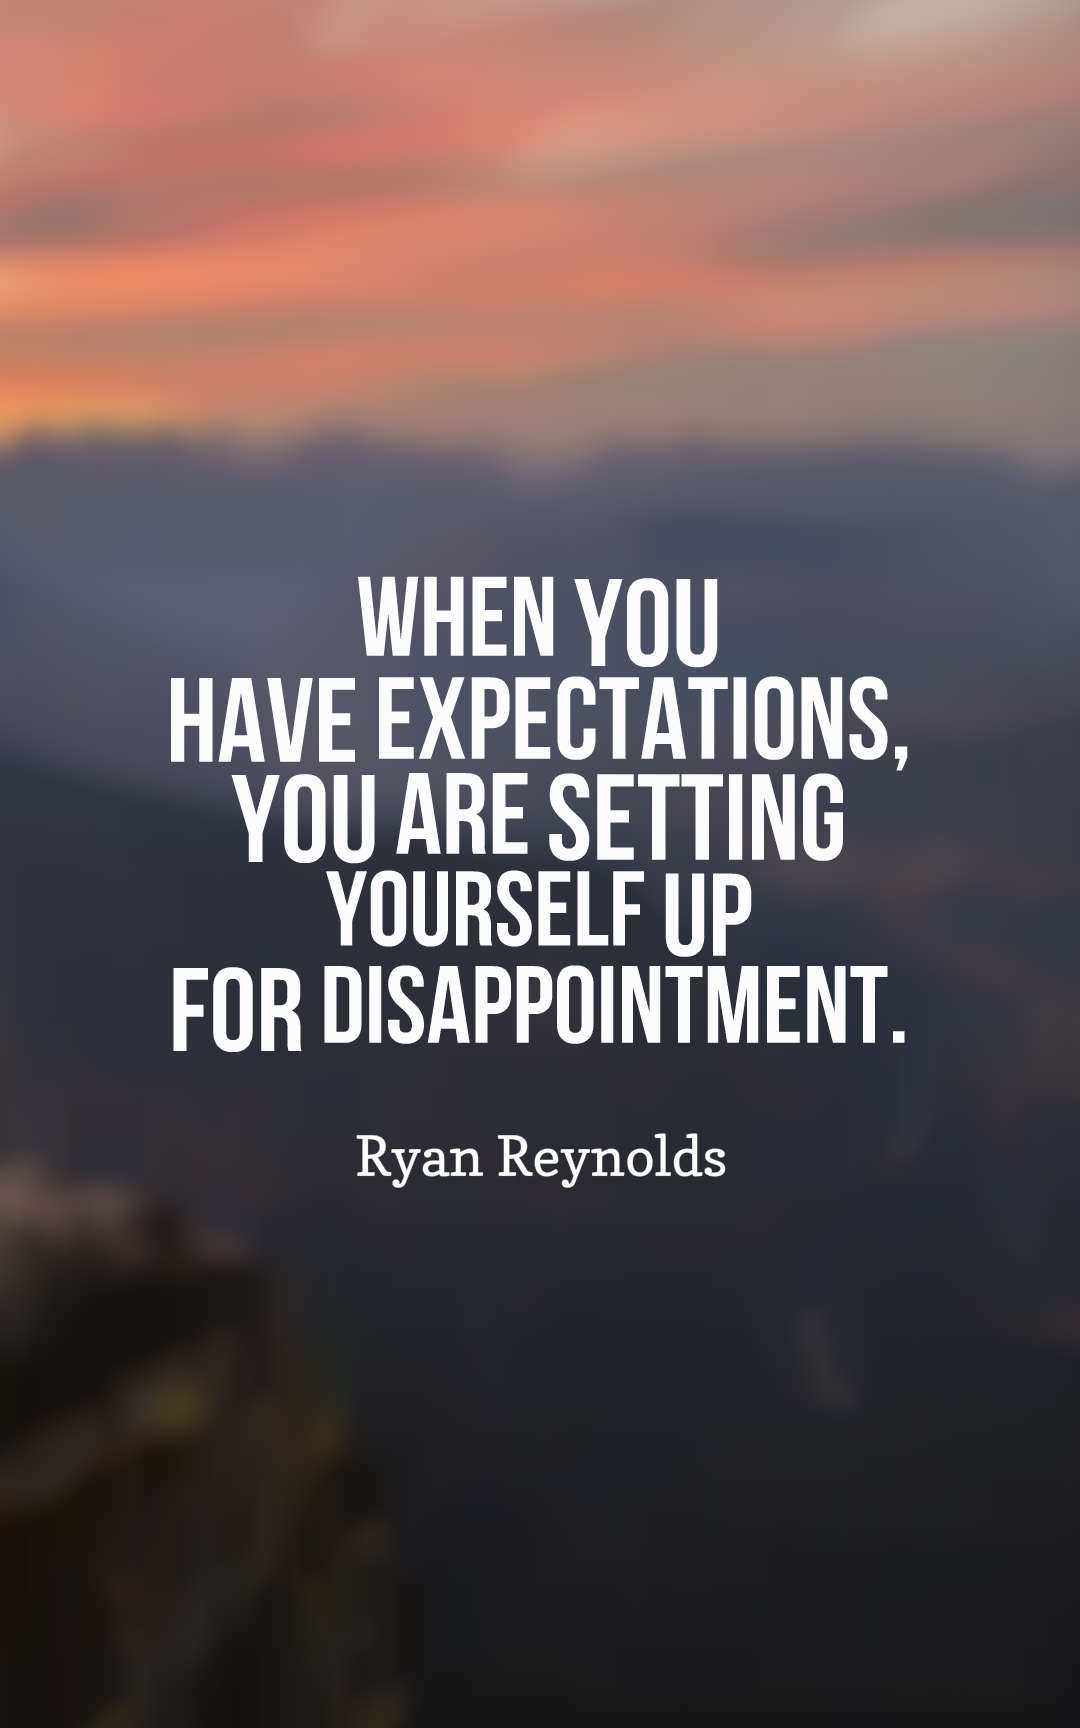 When you have expectations, you are setting yourself up for disappointment.